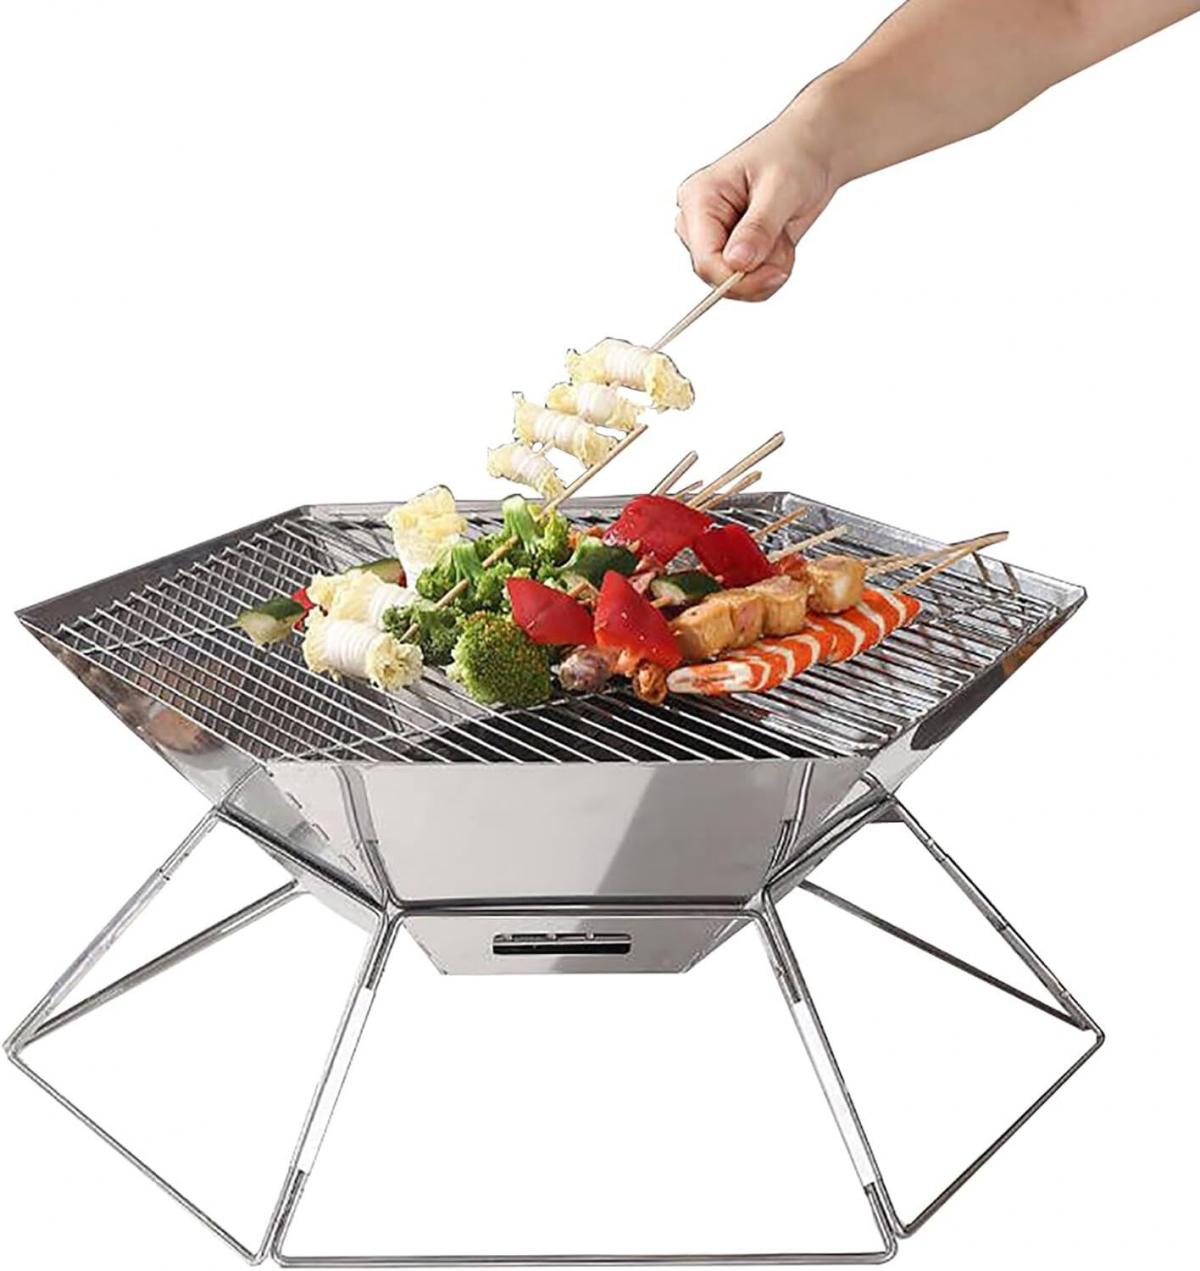 Portable Charcoal Grill,Hexagonal Barbecue Rack, Portable Camping Grill Charcoal for Outdoor